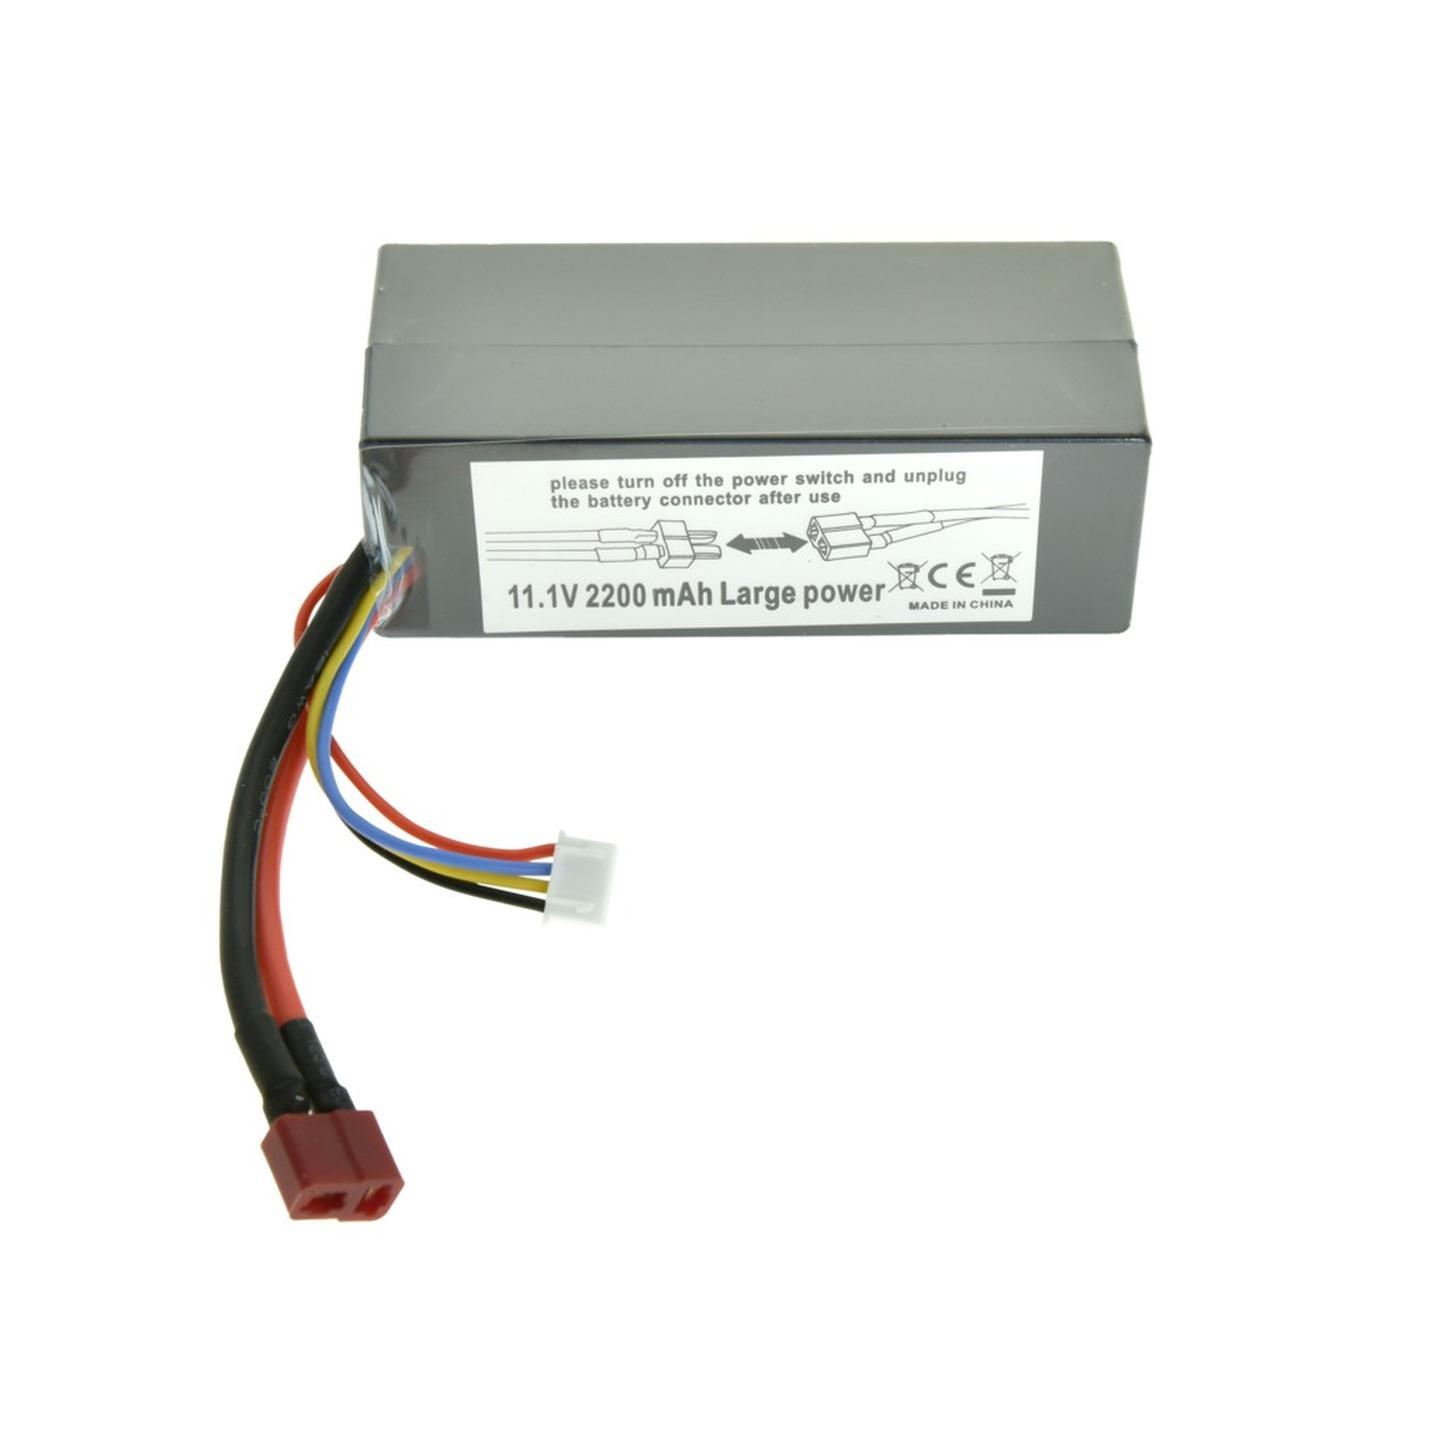 Spare 11.1V 2200mAh Battery to suit GT4802 R/C Car